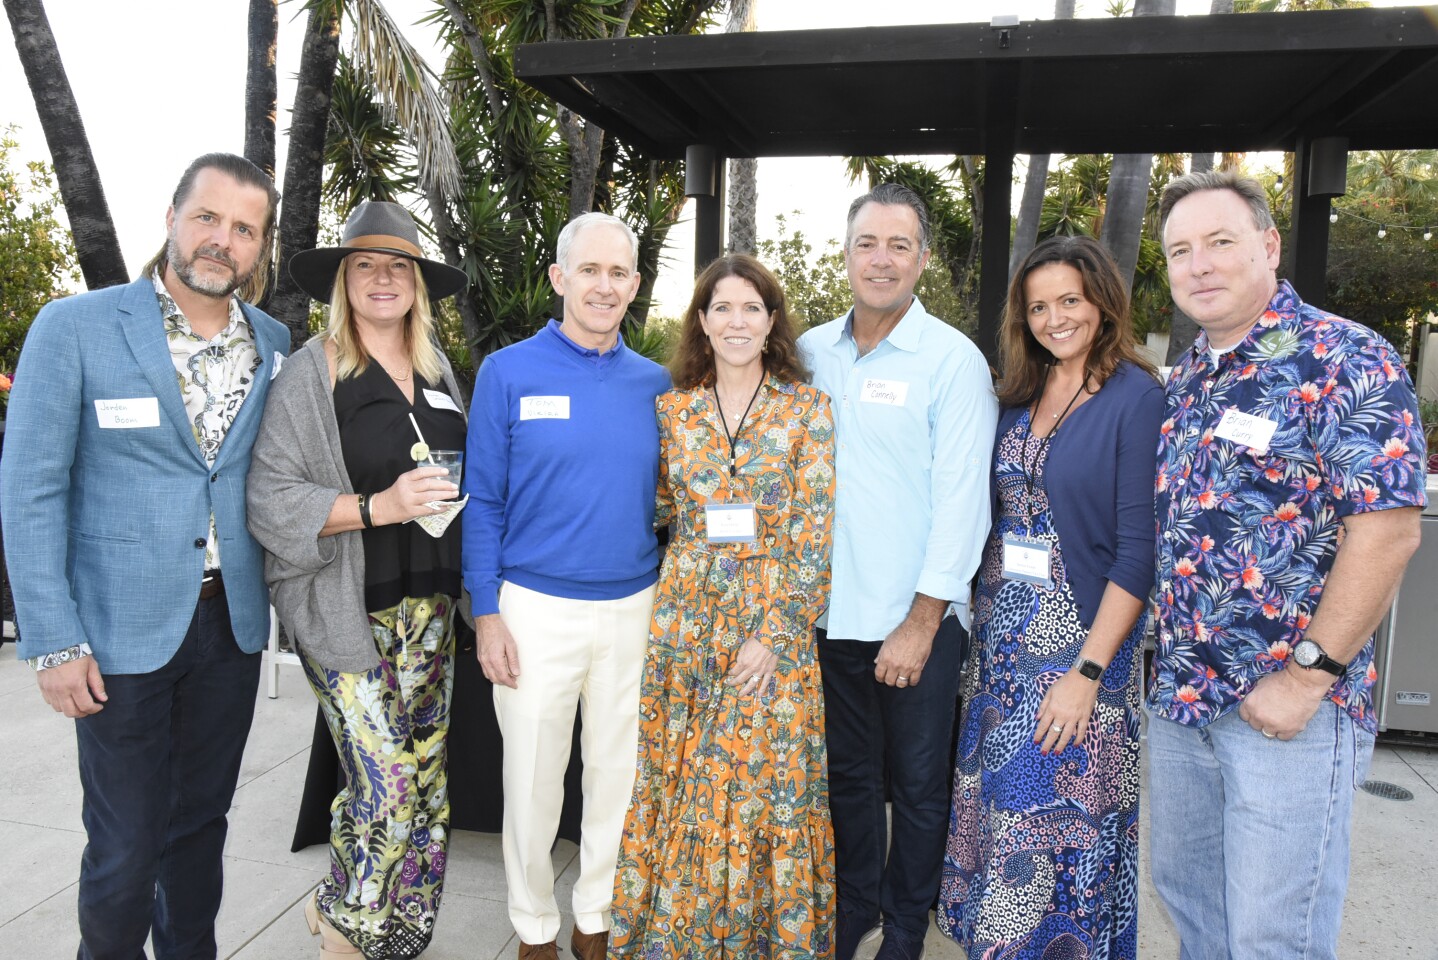 Jorden and Kristin Boom, Tom Vieira, RSFEF co-chair Kate Butler, Brian Connelly, event chair/Community Partners Vice Chair Jessica Swann, Brian Curry